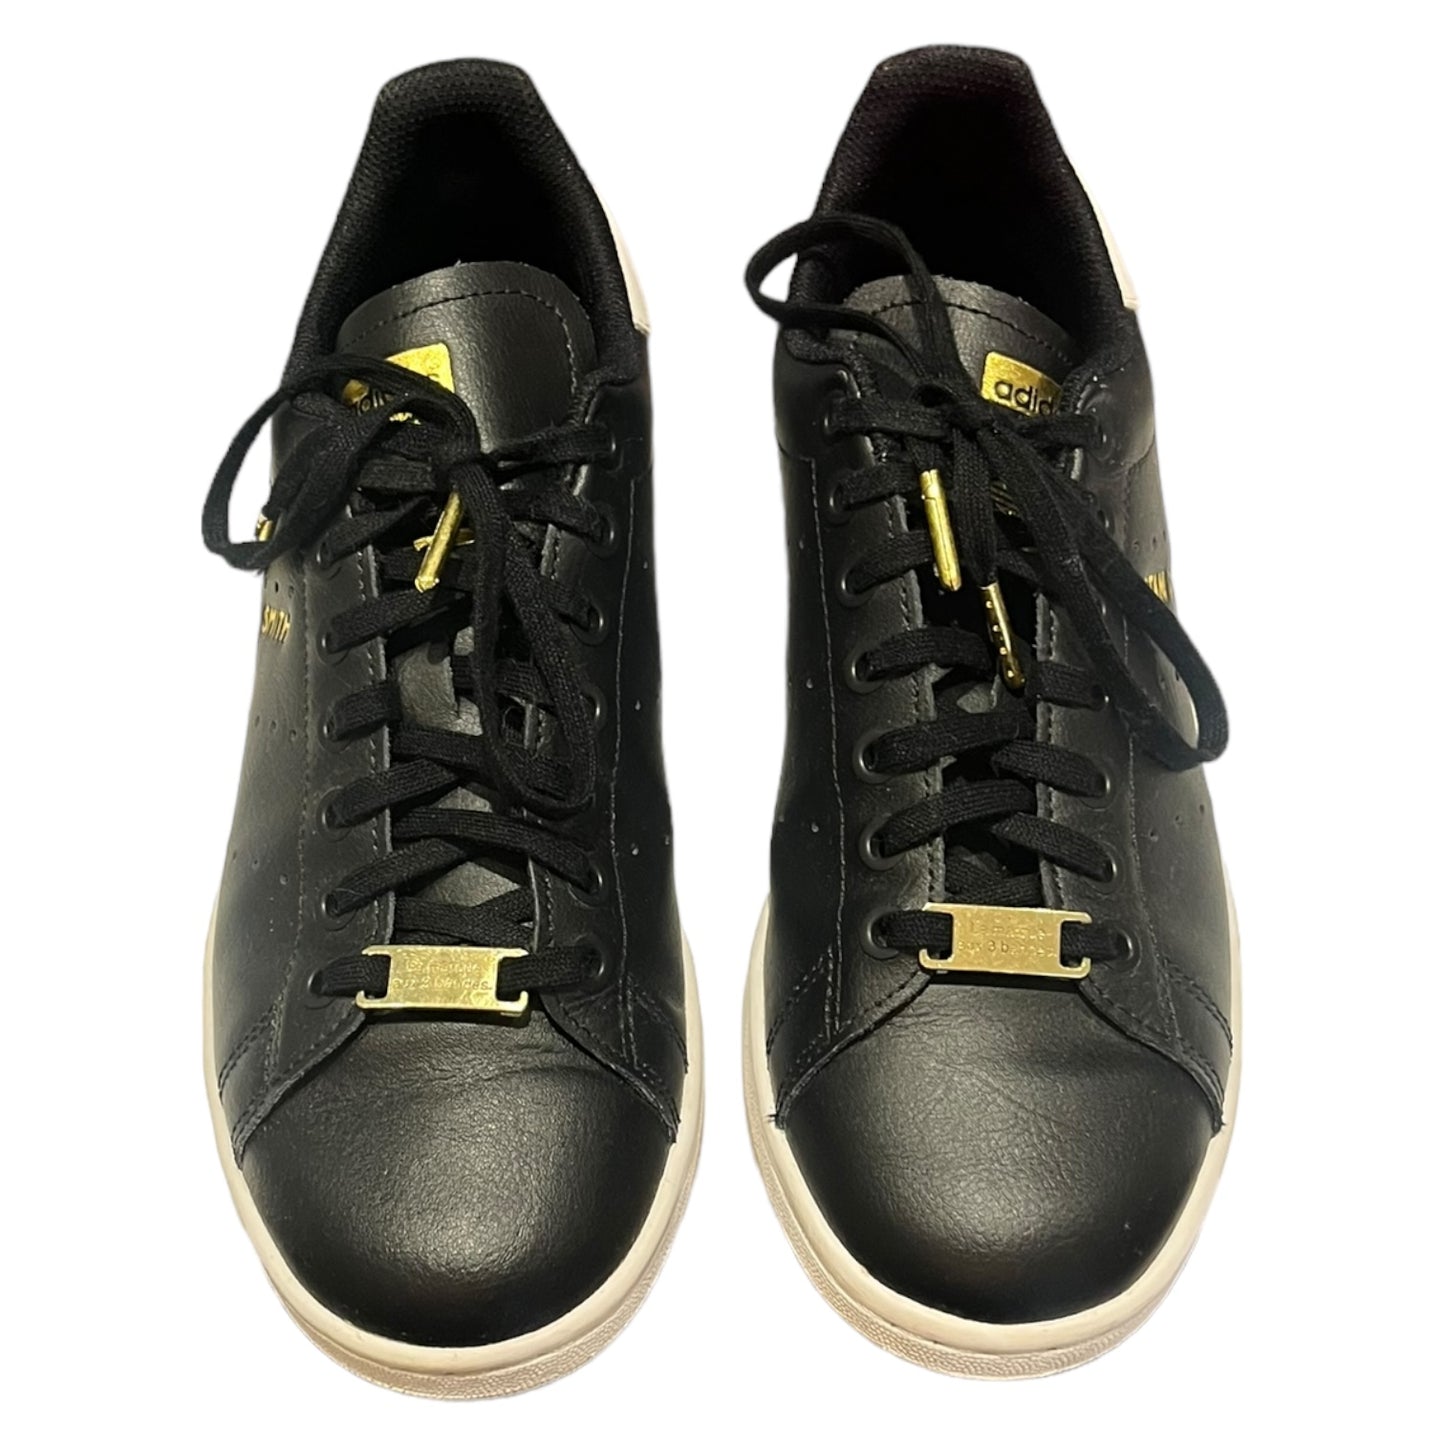 Adidas Stan Smith Black Leather Trainers